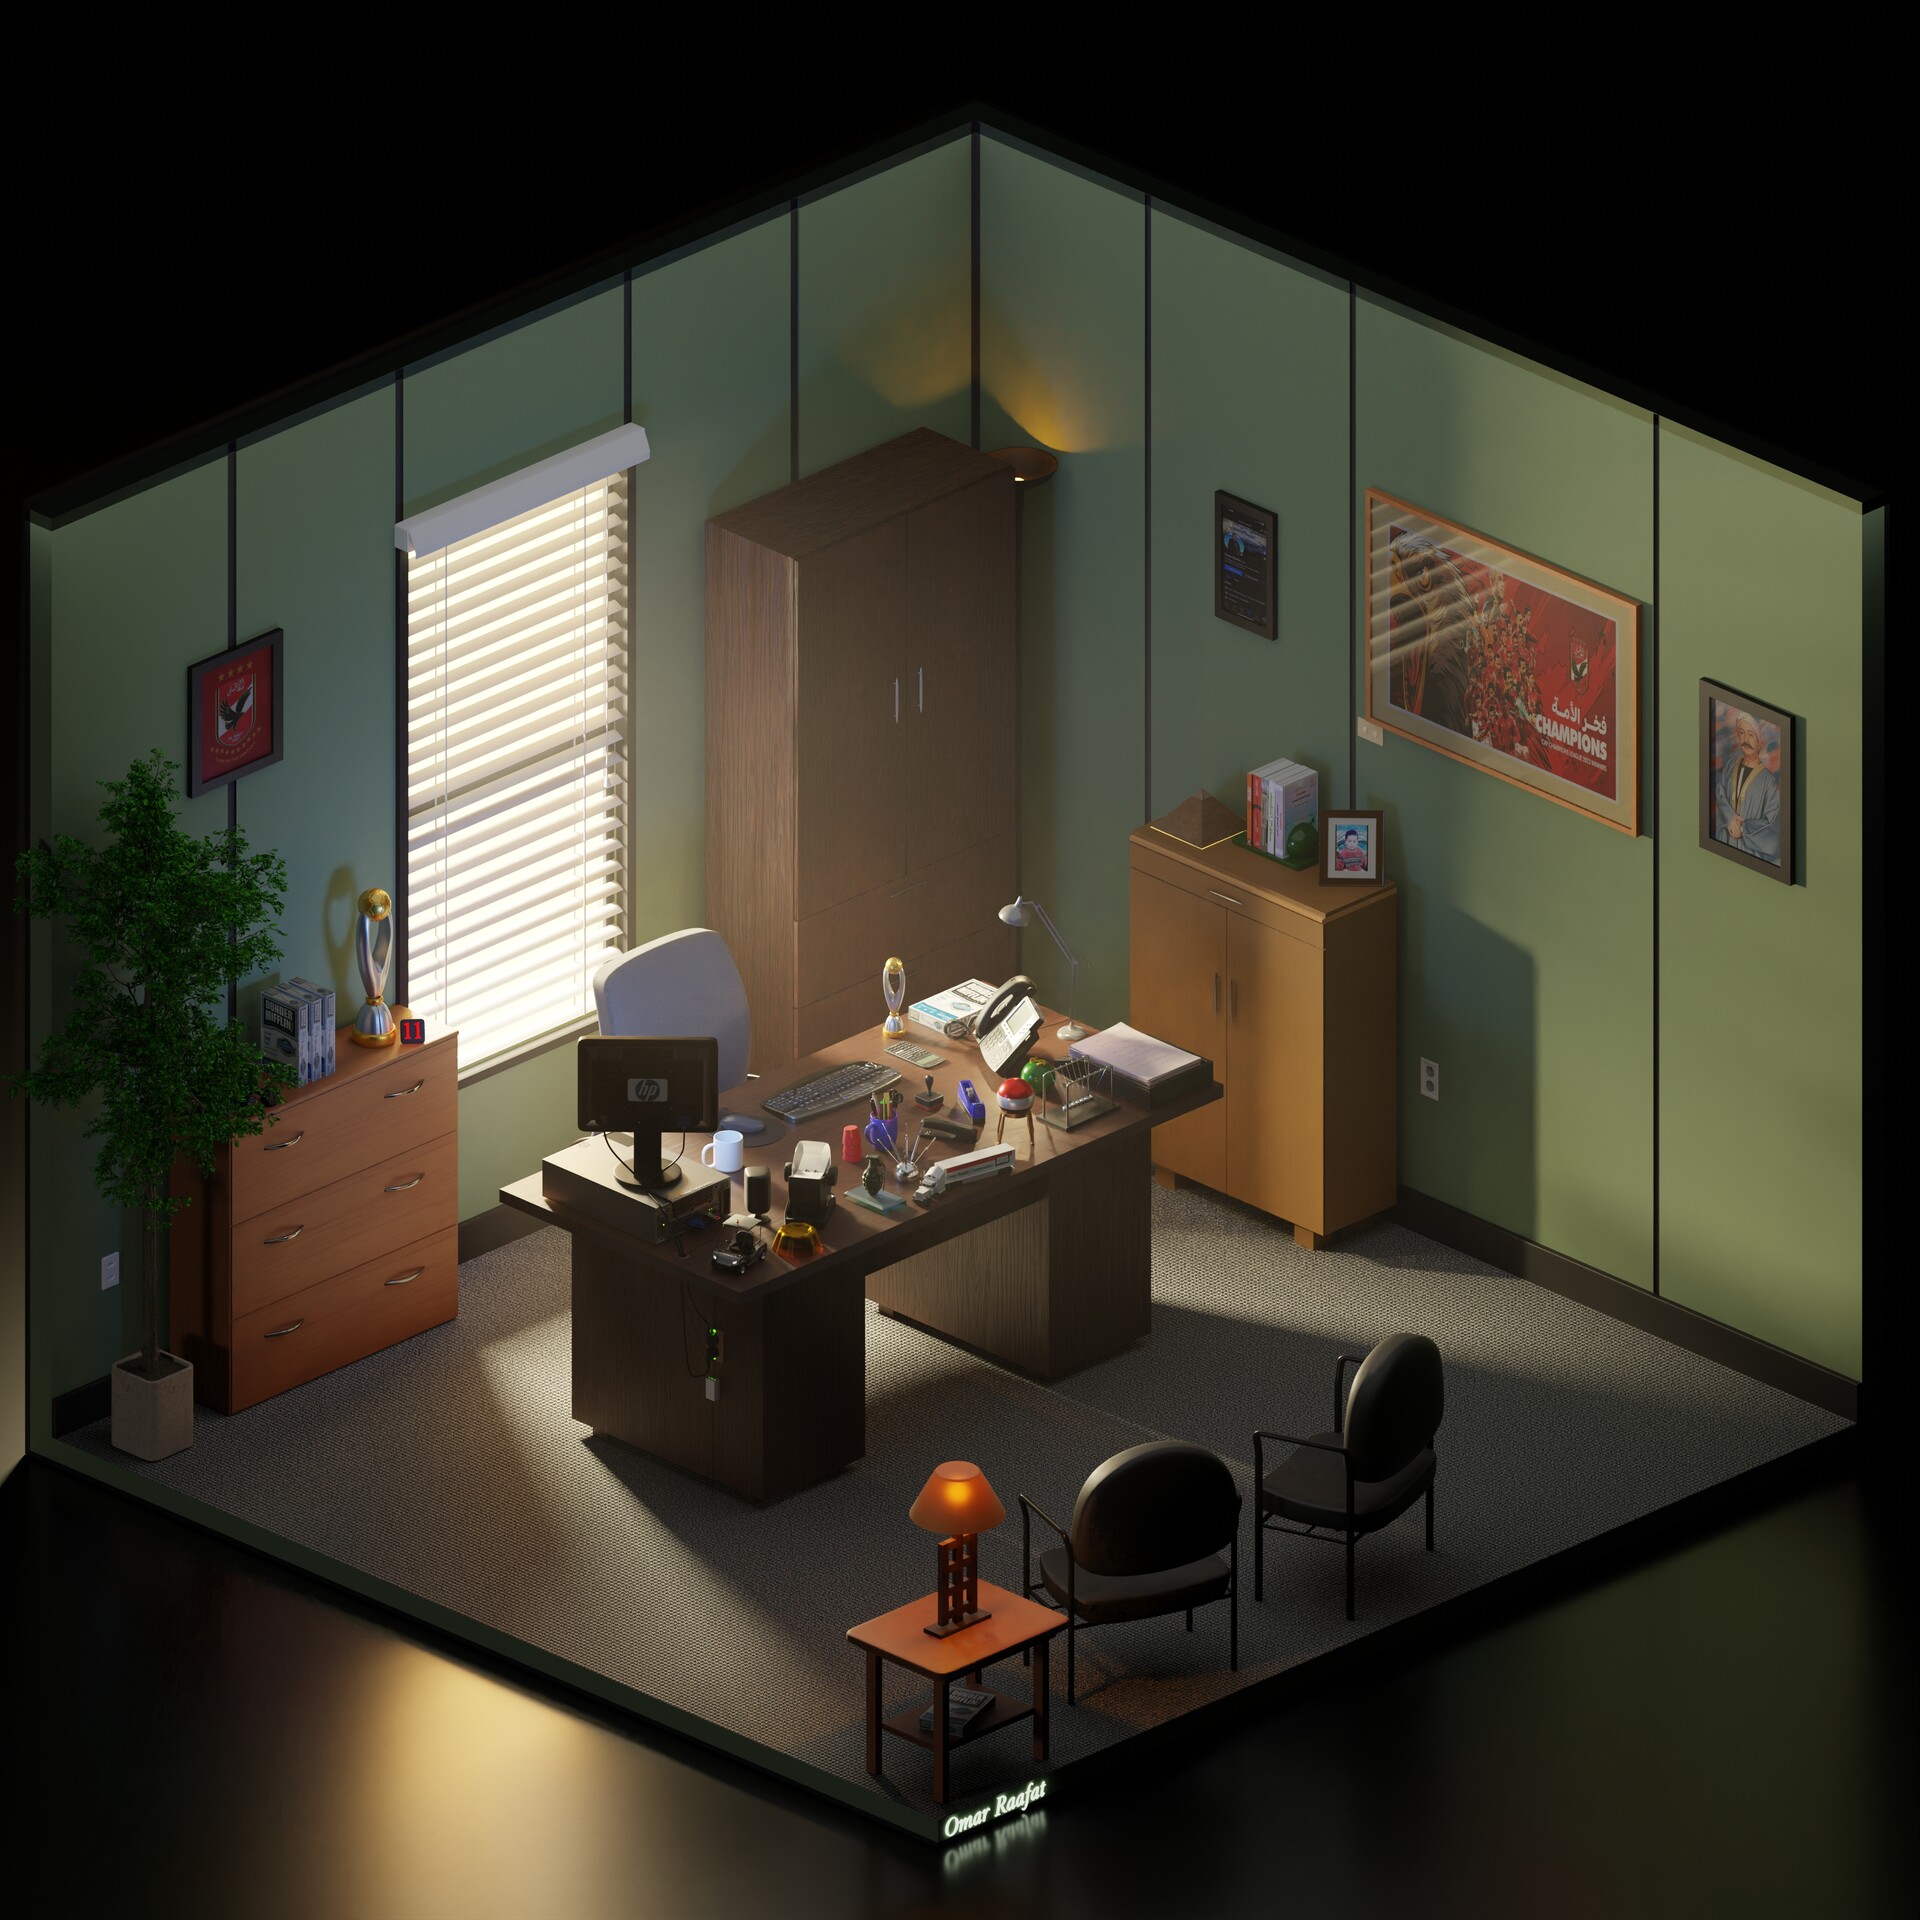 Someone recreated The Office's Dunder Mifflin in explorable 3D and I love  it